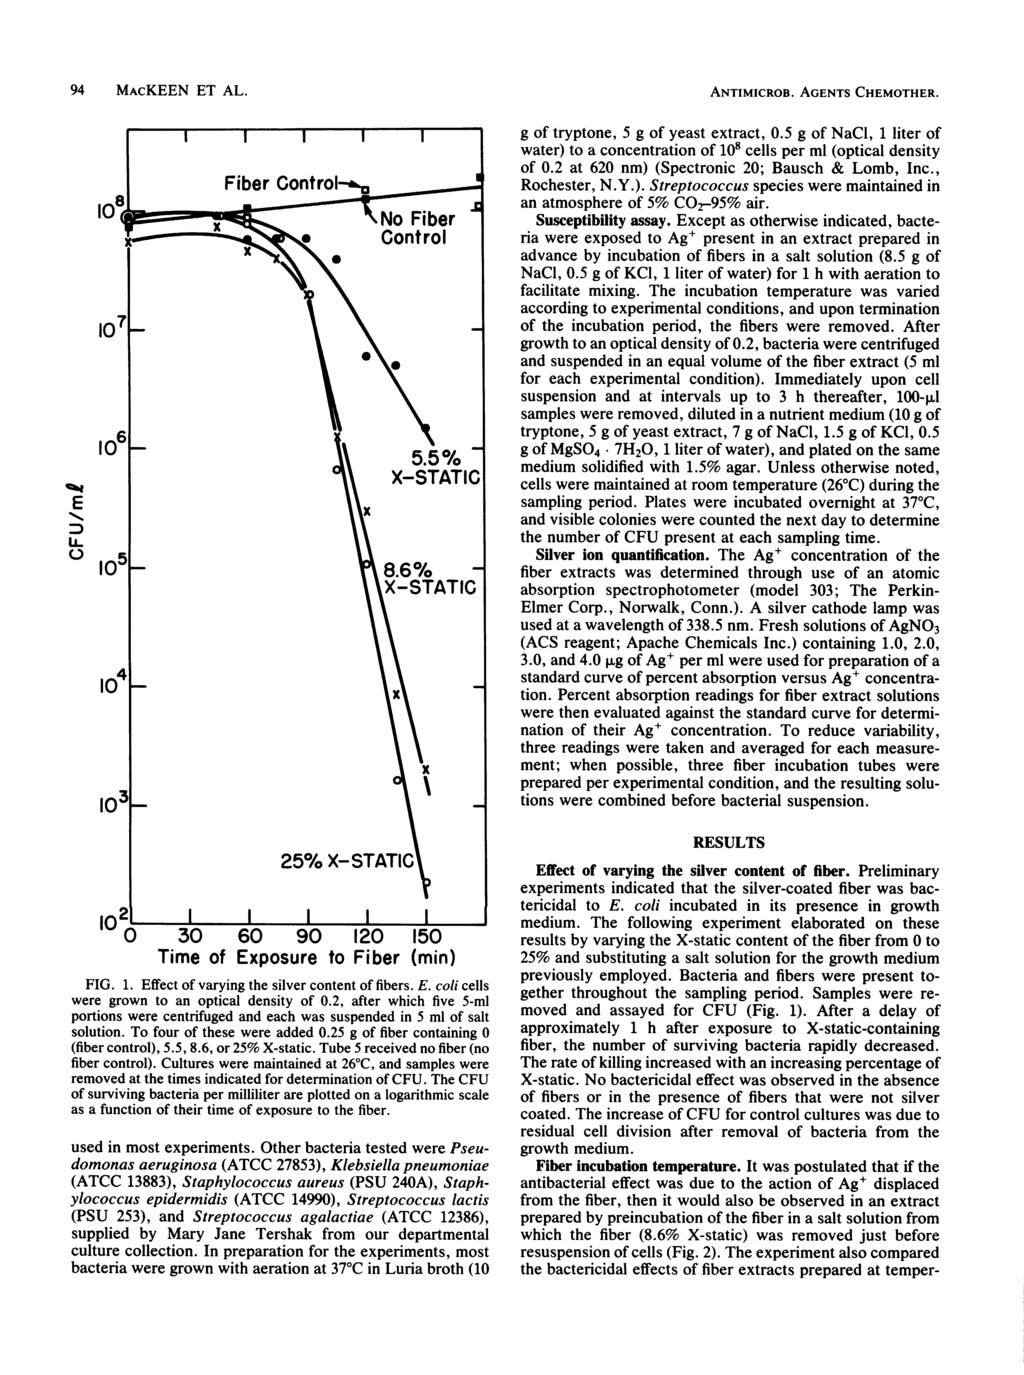 94 MAcKN T AL. 1 8.6% X-STATIC 4 1 25% X-STATIC I I 1 I 3 6 9 12 15 Time of xposure to Fiber (min) FIG. 1. ffect of varying the silver content of fibers.